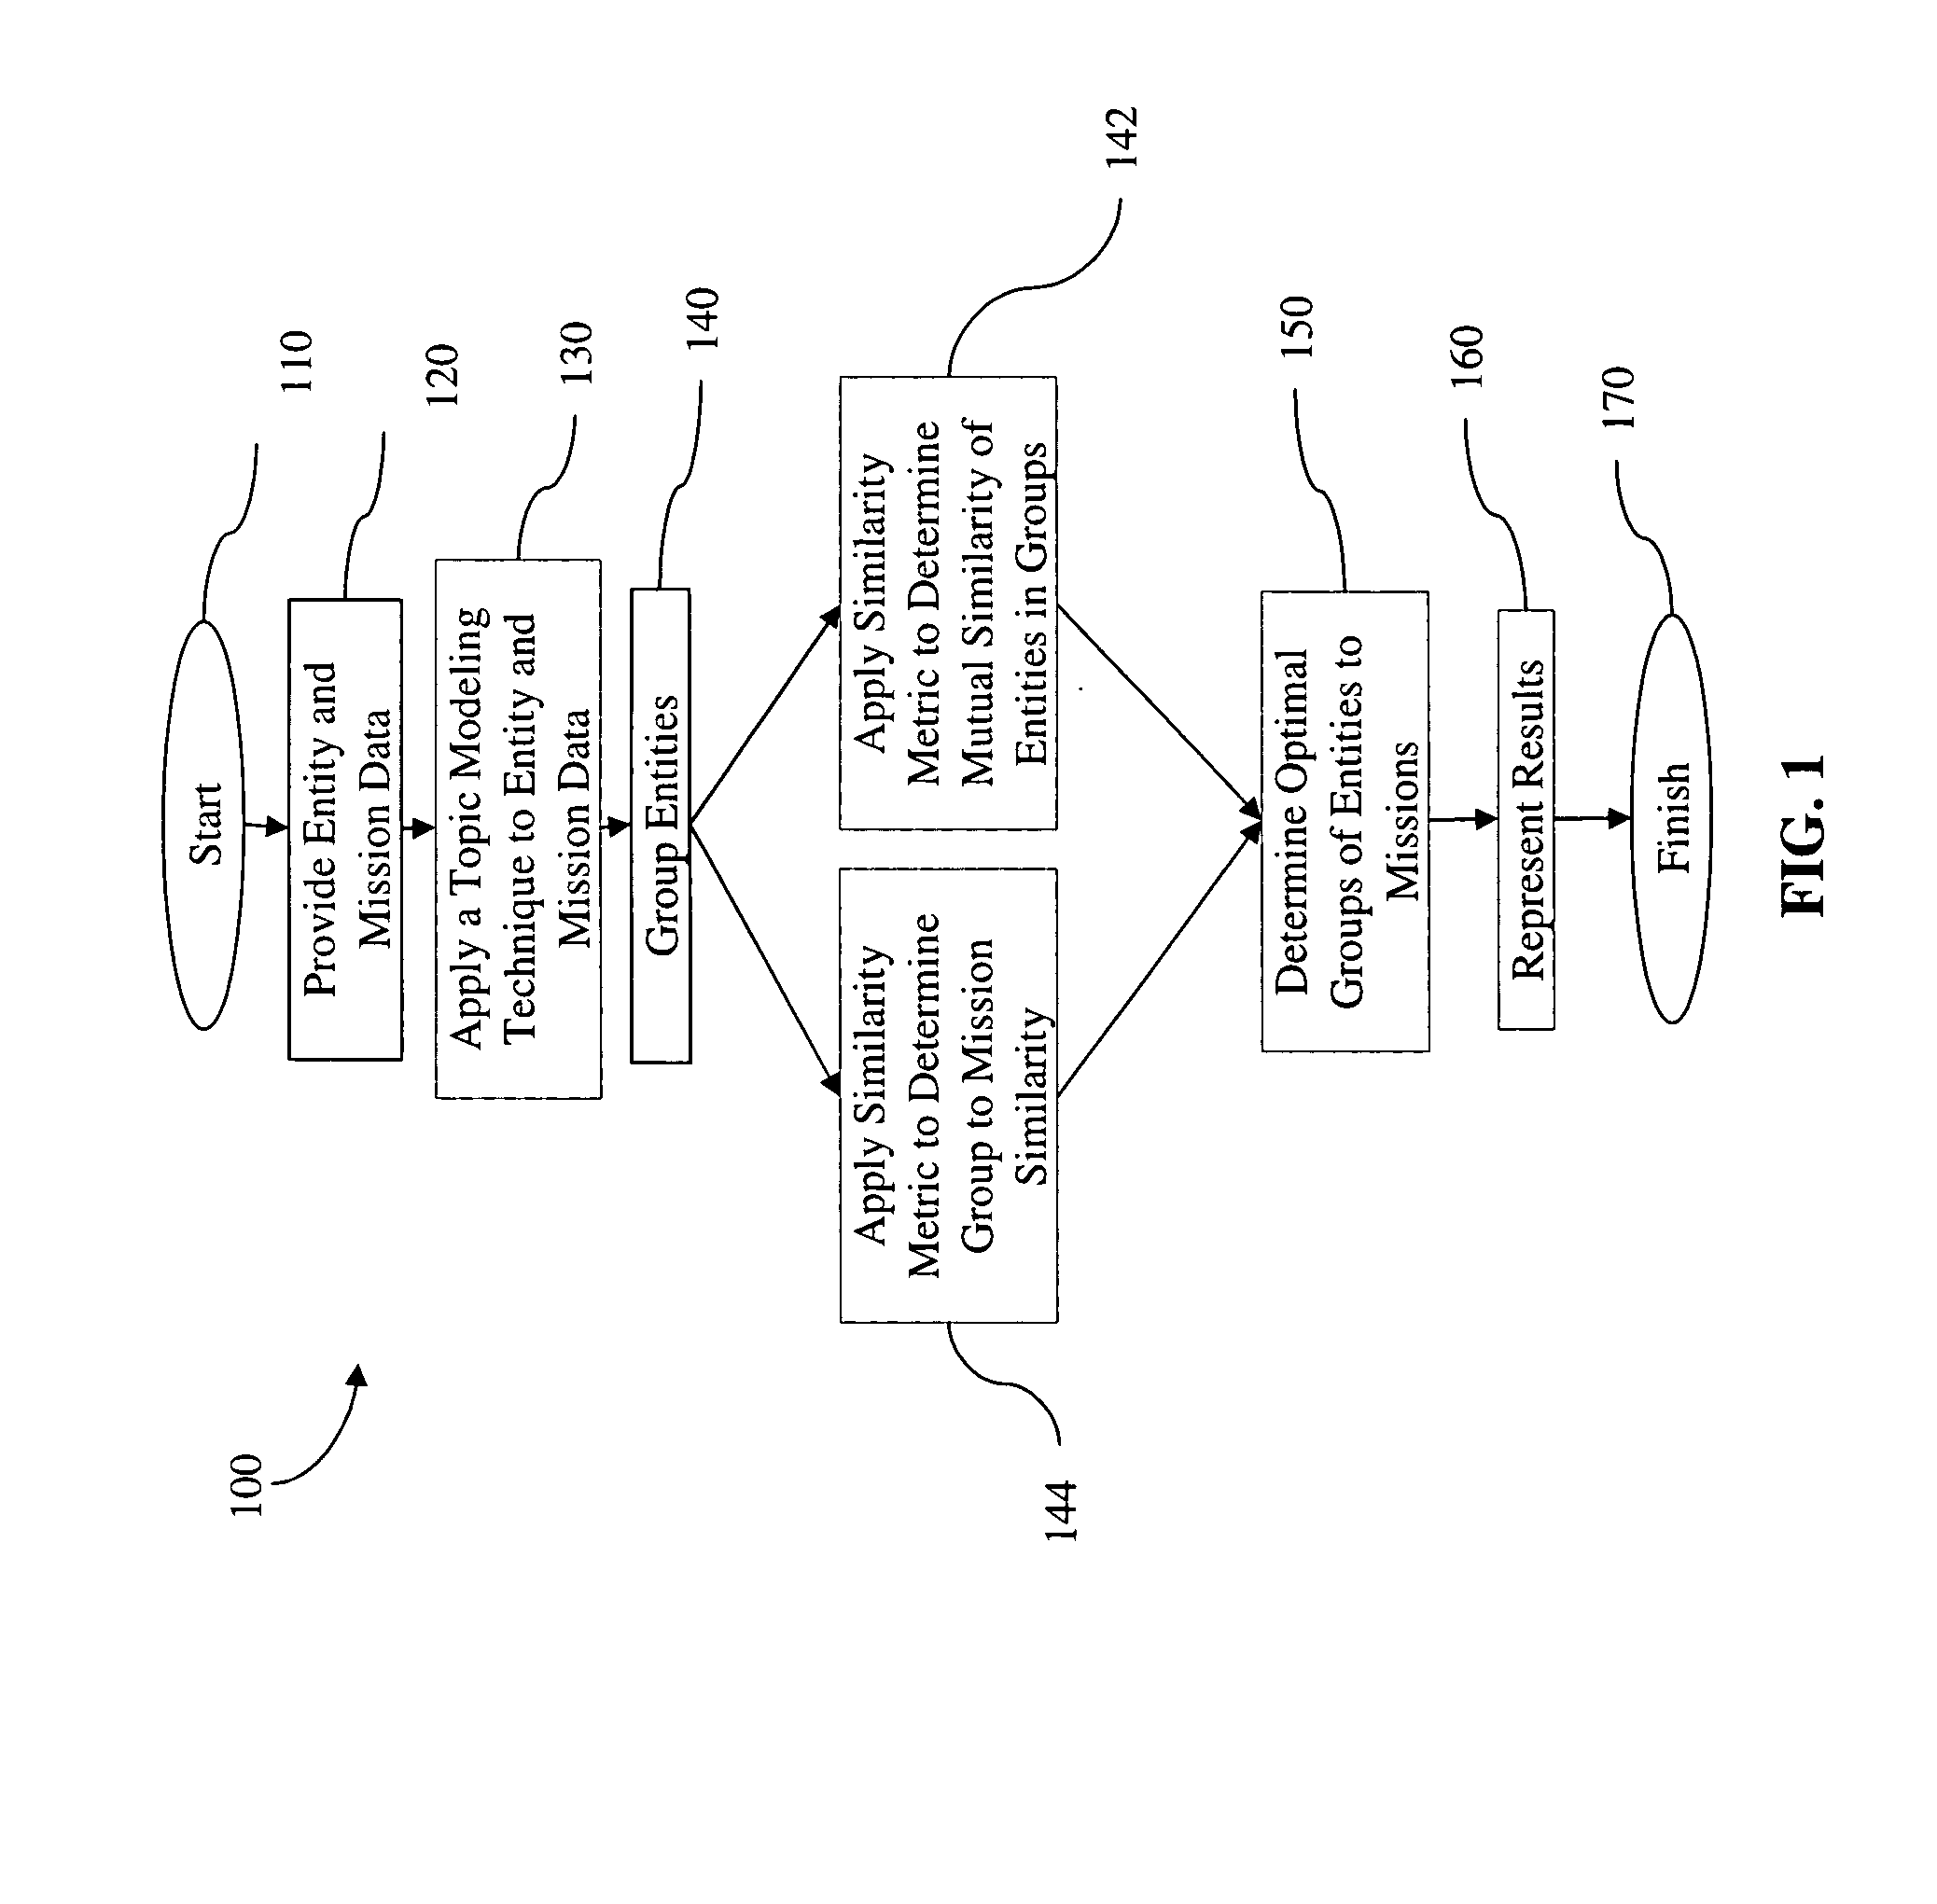 Method and system to compare data entities